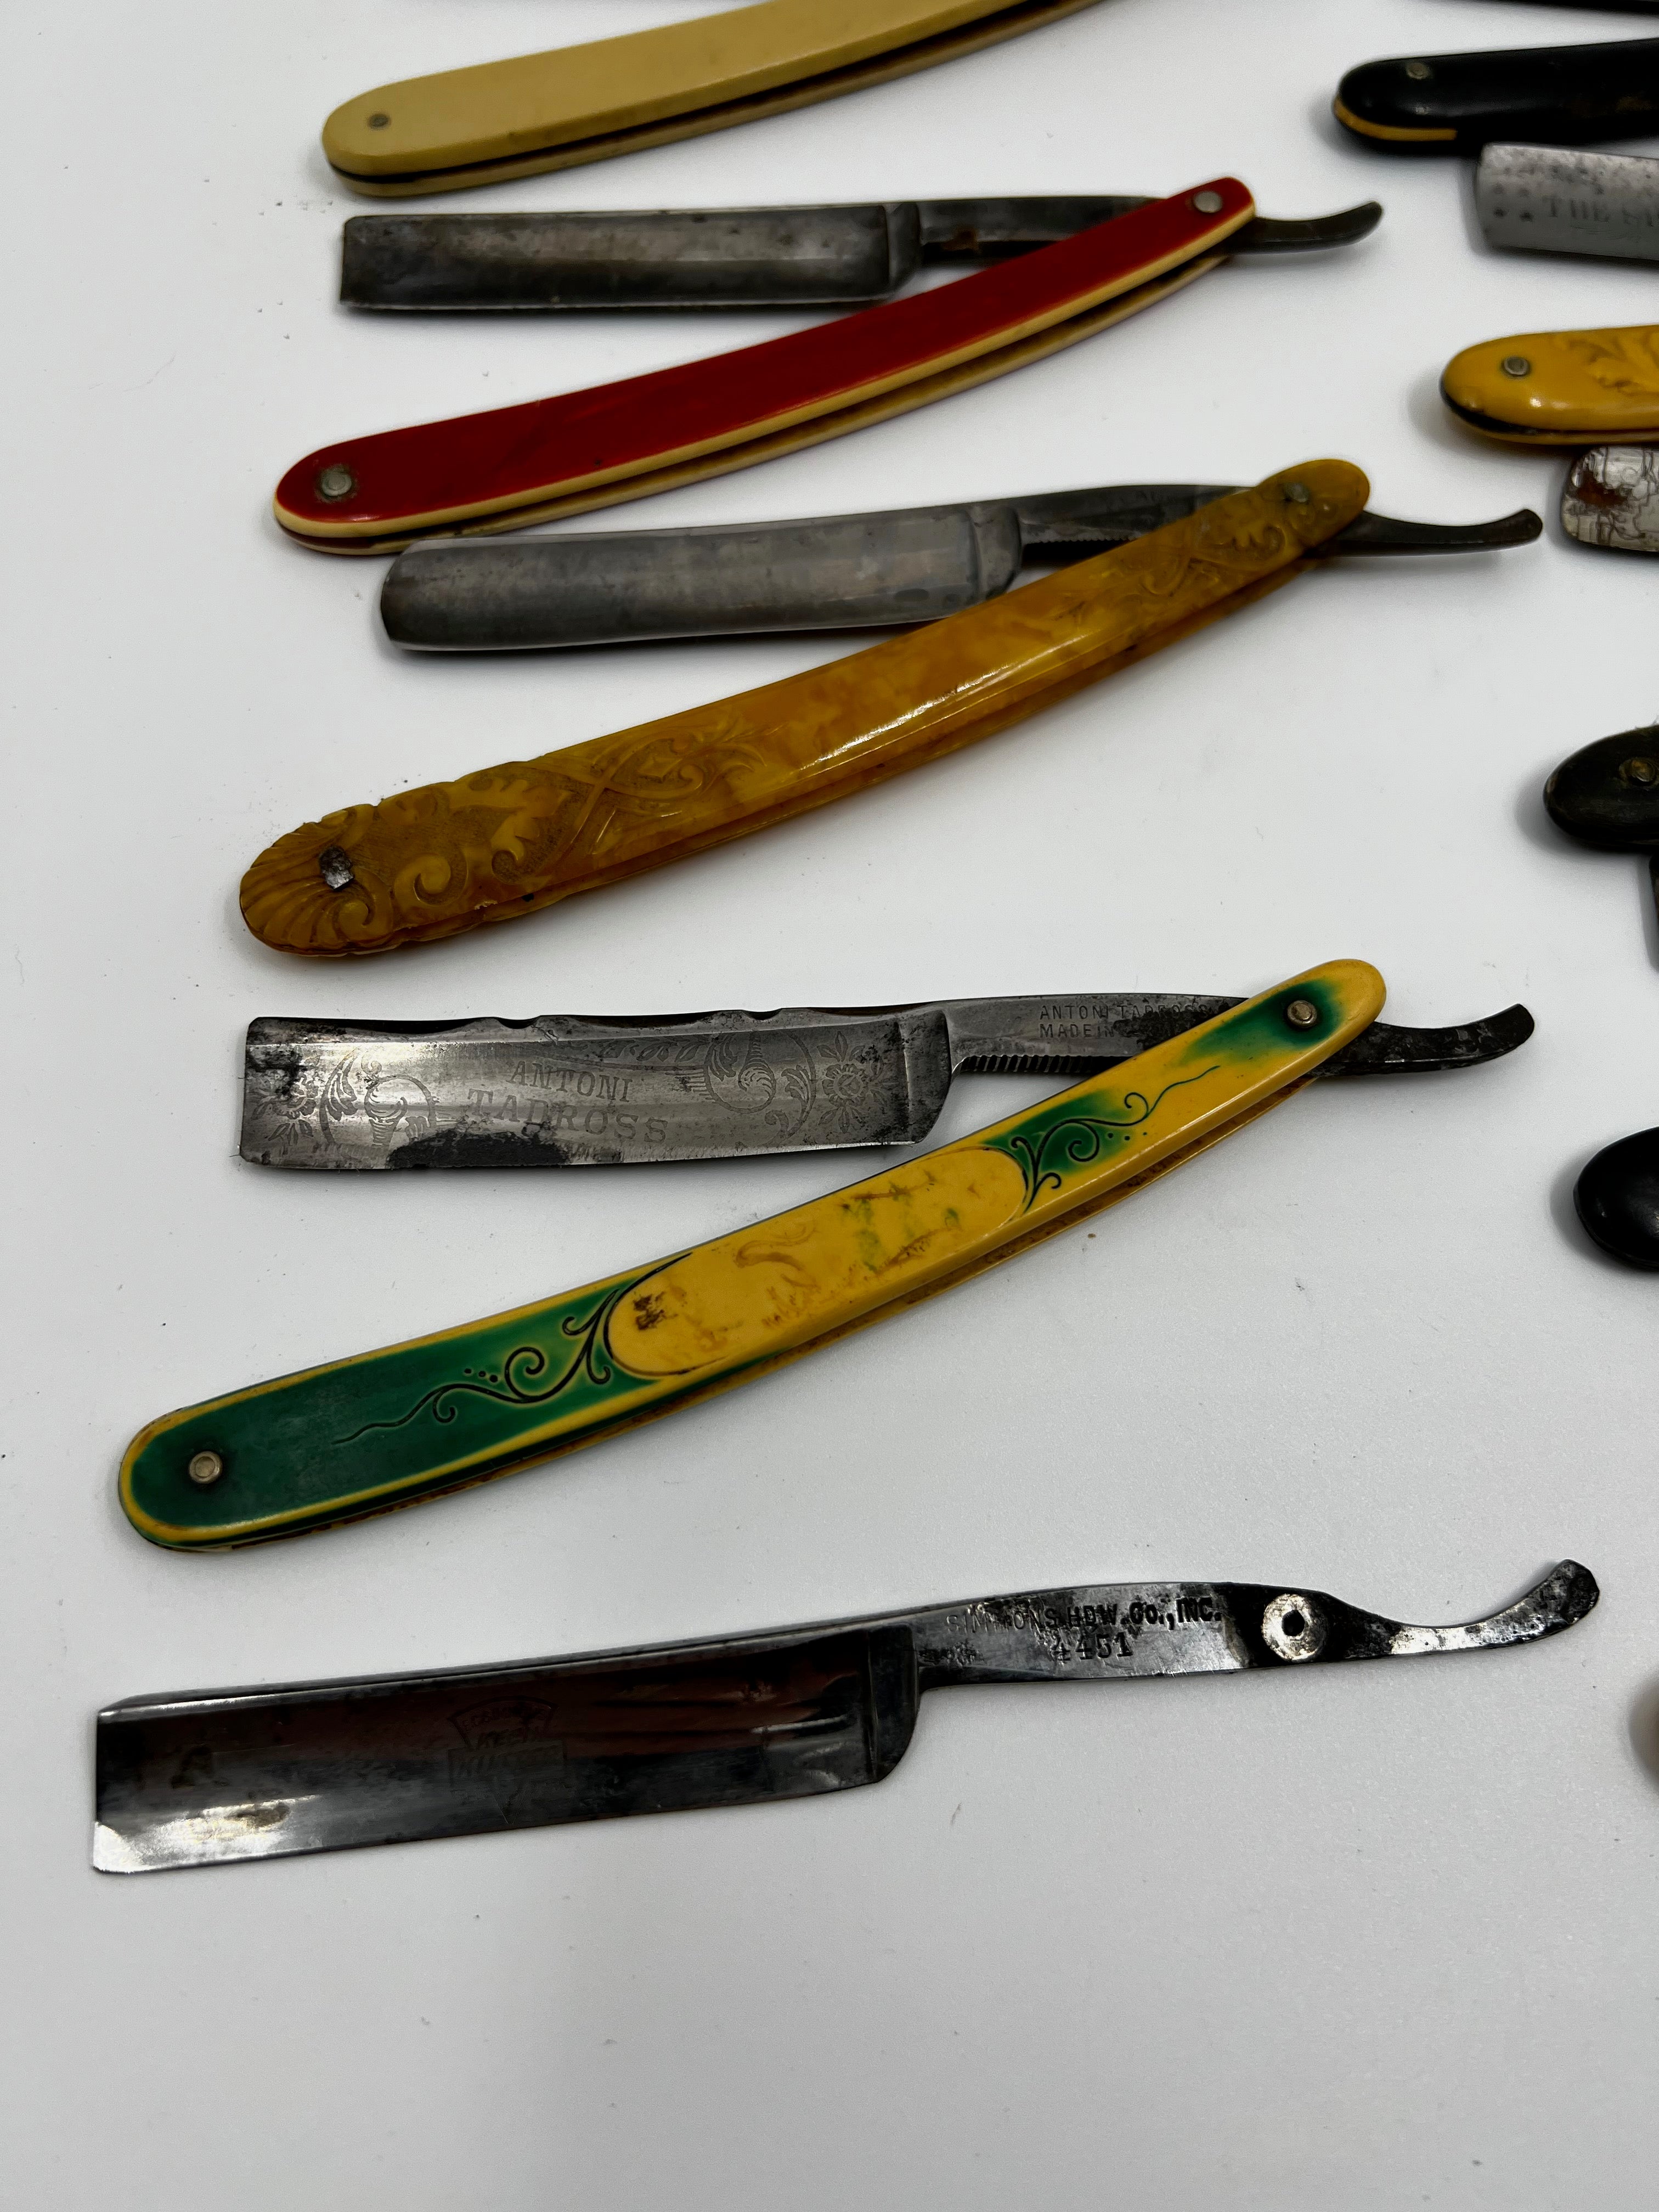 Vintage 10 Straight Razor Lot #17 - May Contain Sheffield, Solingen, Japanese & USA makers, as pictured